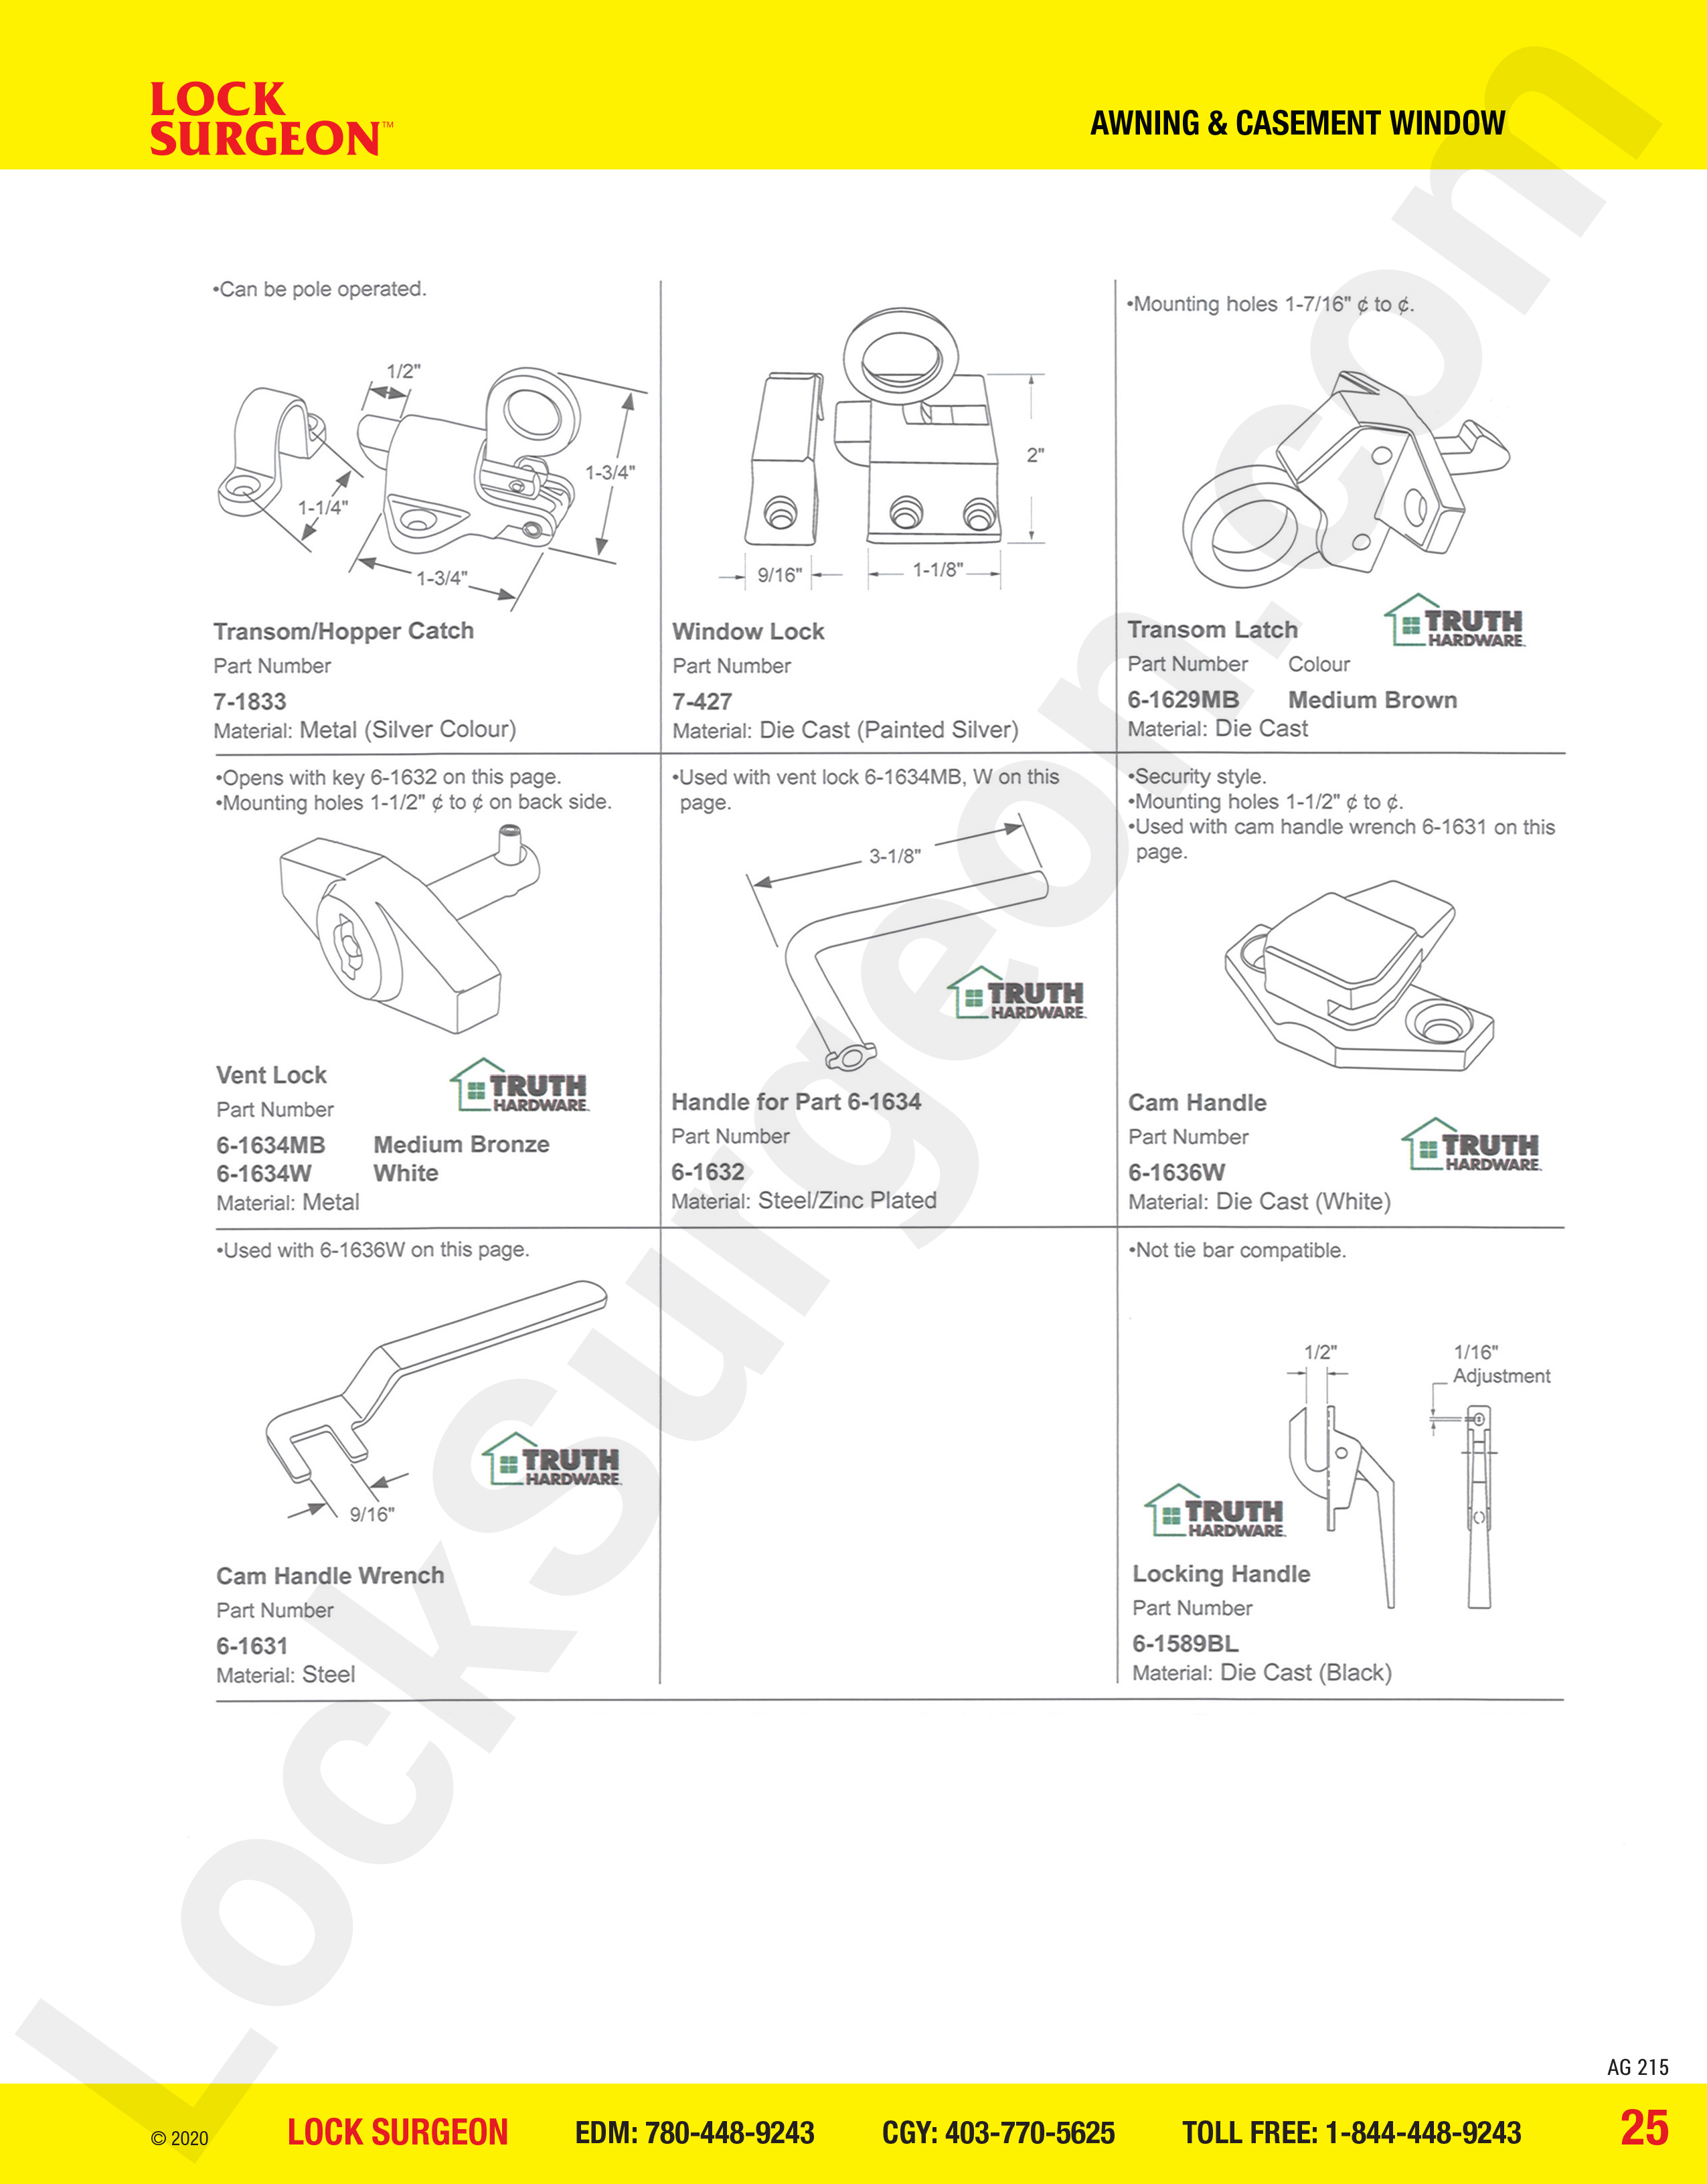 awning and casement window parts for catch, latch, lock and handle